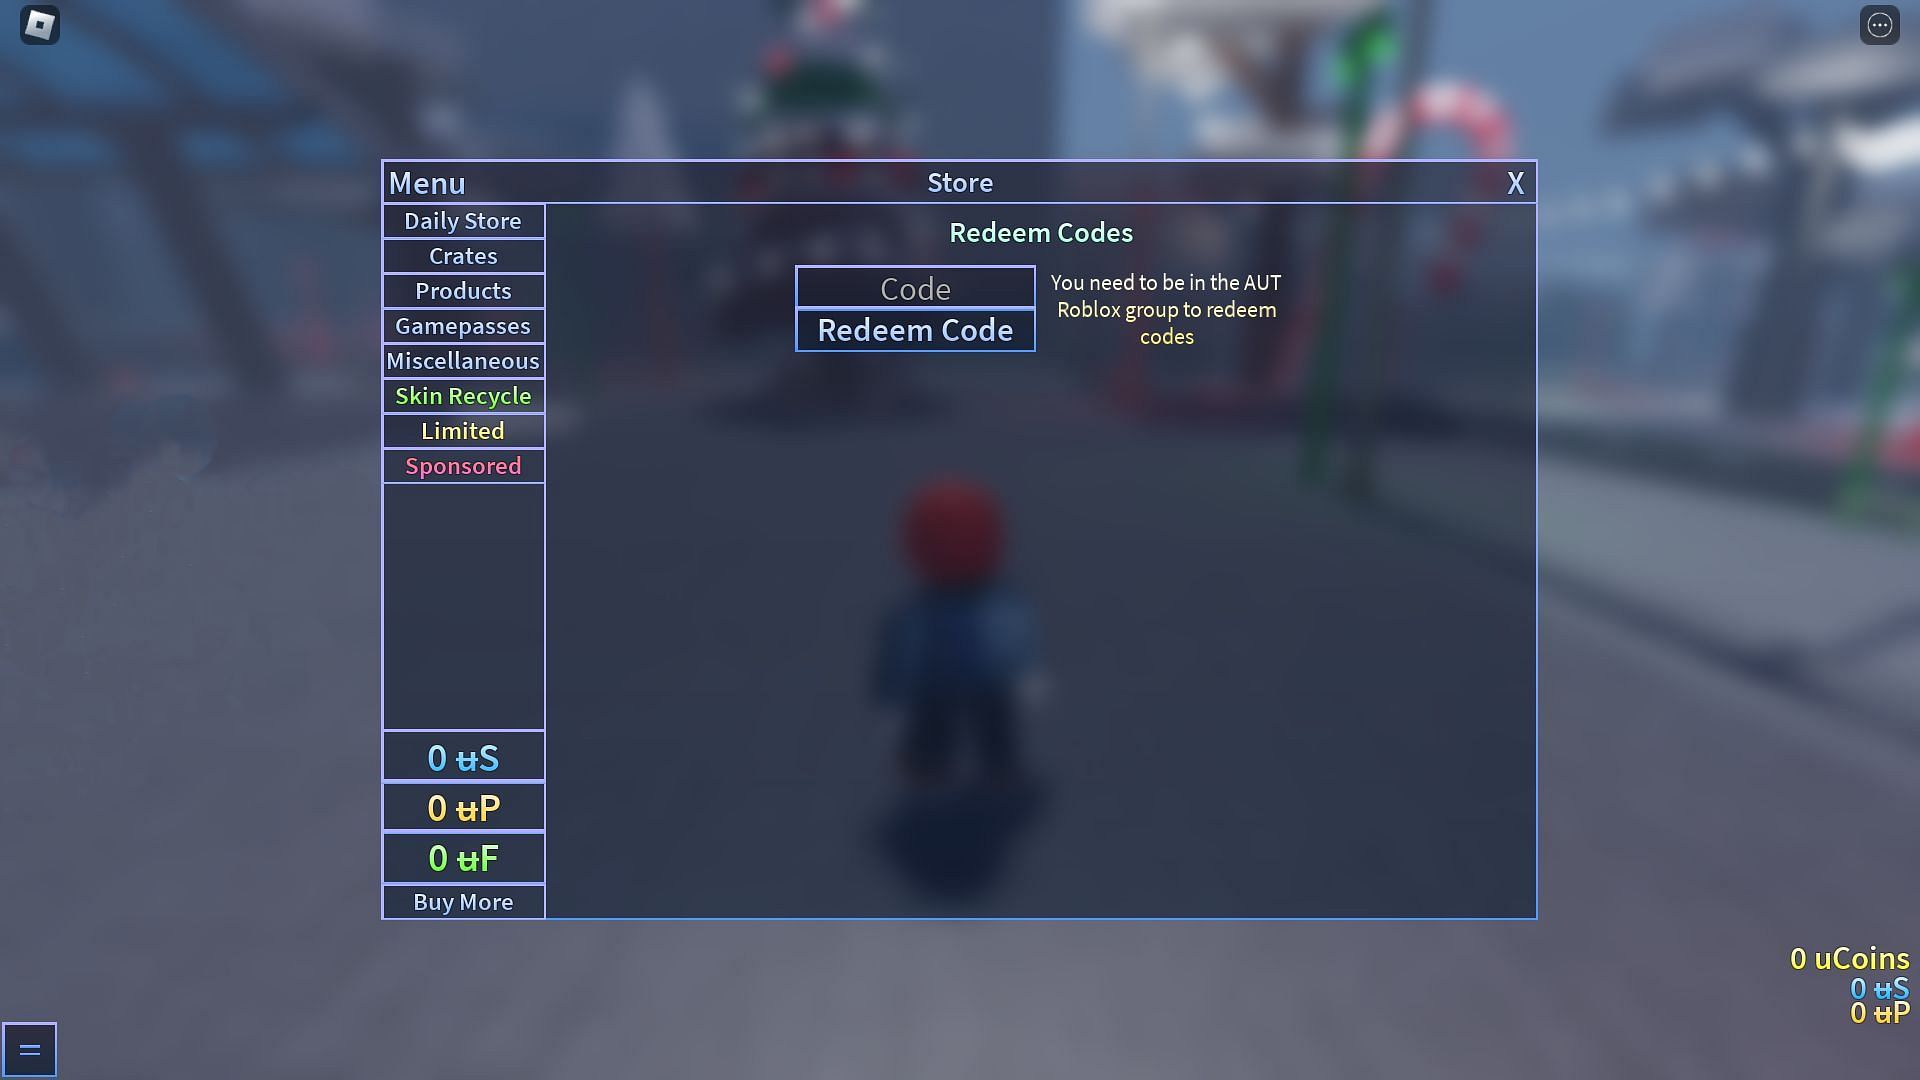 Redeem Codes screen in AUT (Image by Roblox and Sportskeeda)